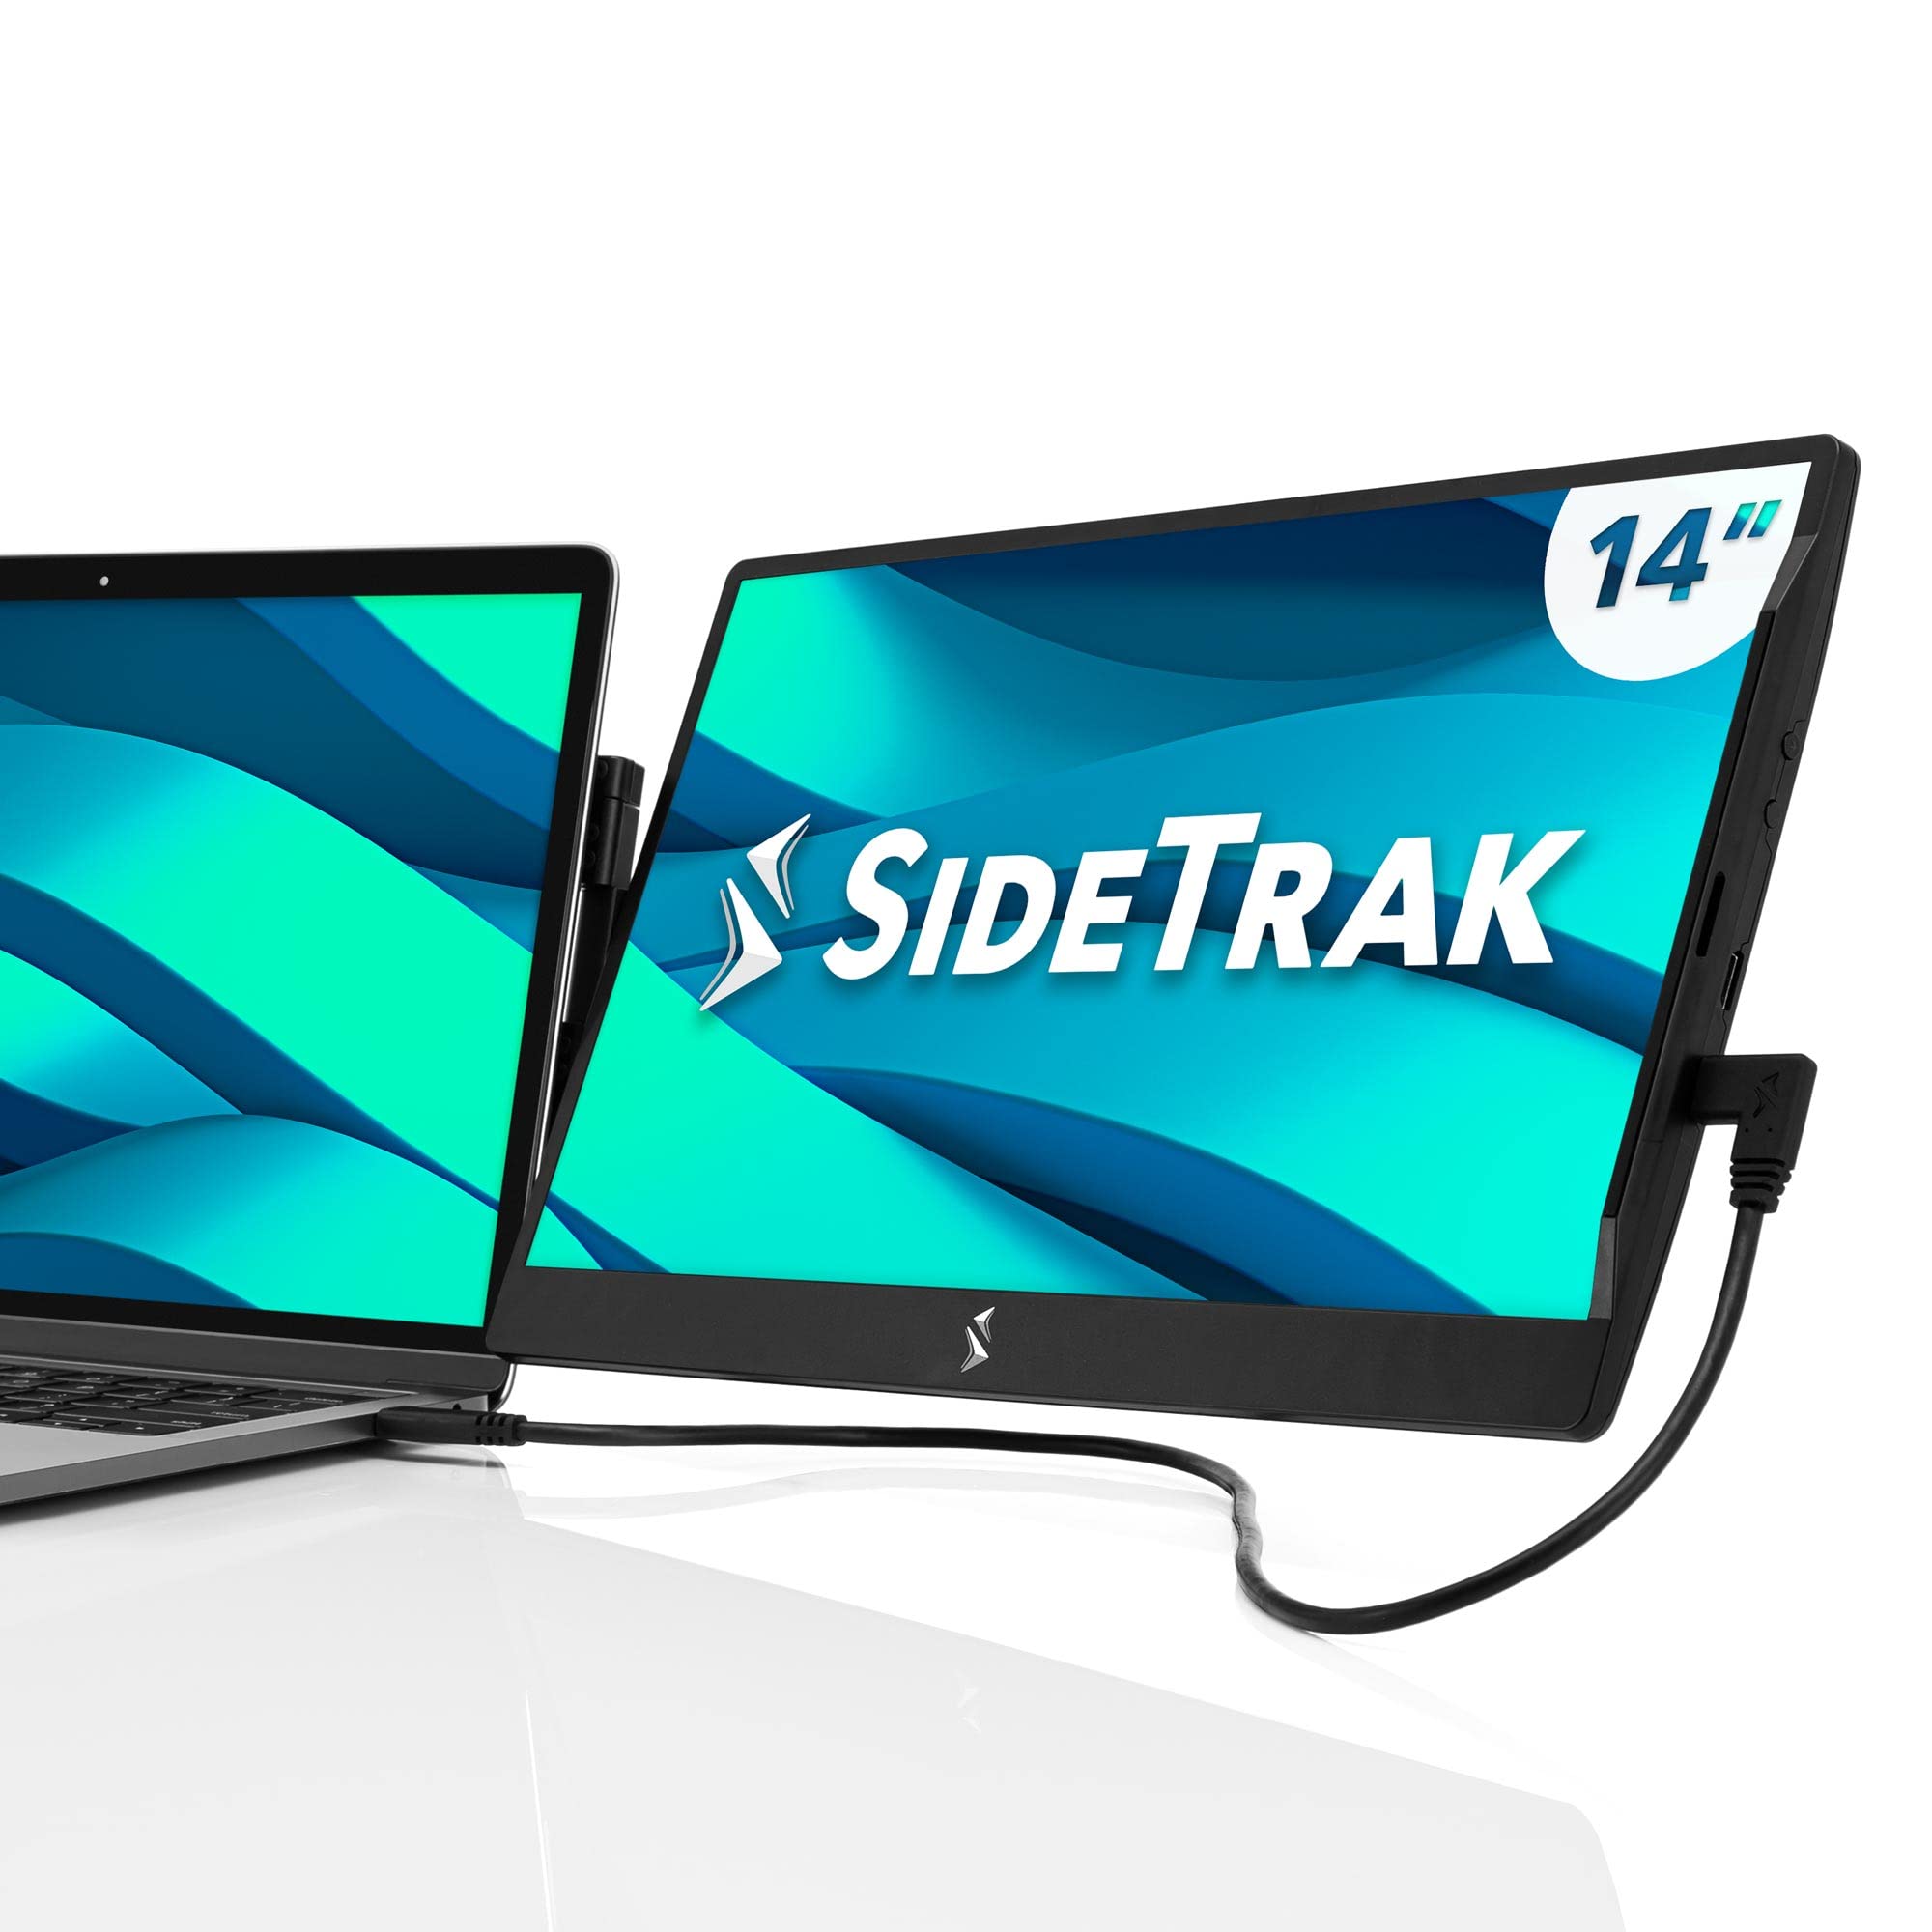 SideTrak Swivel 14” Patented Attachable Portable Monitor for Laptop | FHD TFT USB Rotating Laptop Dual Screen | Mac, PC, & Chrome Compatible | Fits All Laptops | Powered by USB-C or Mini HDMI (Black)